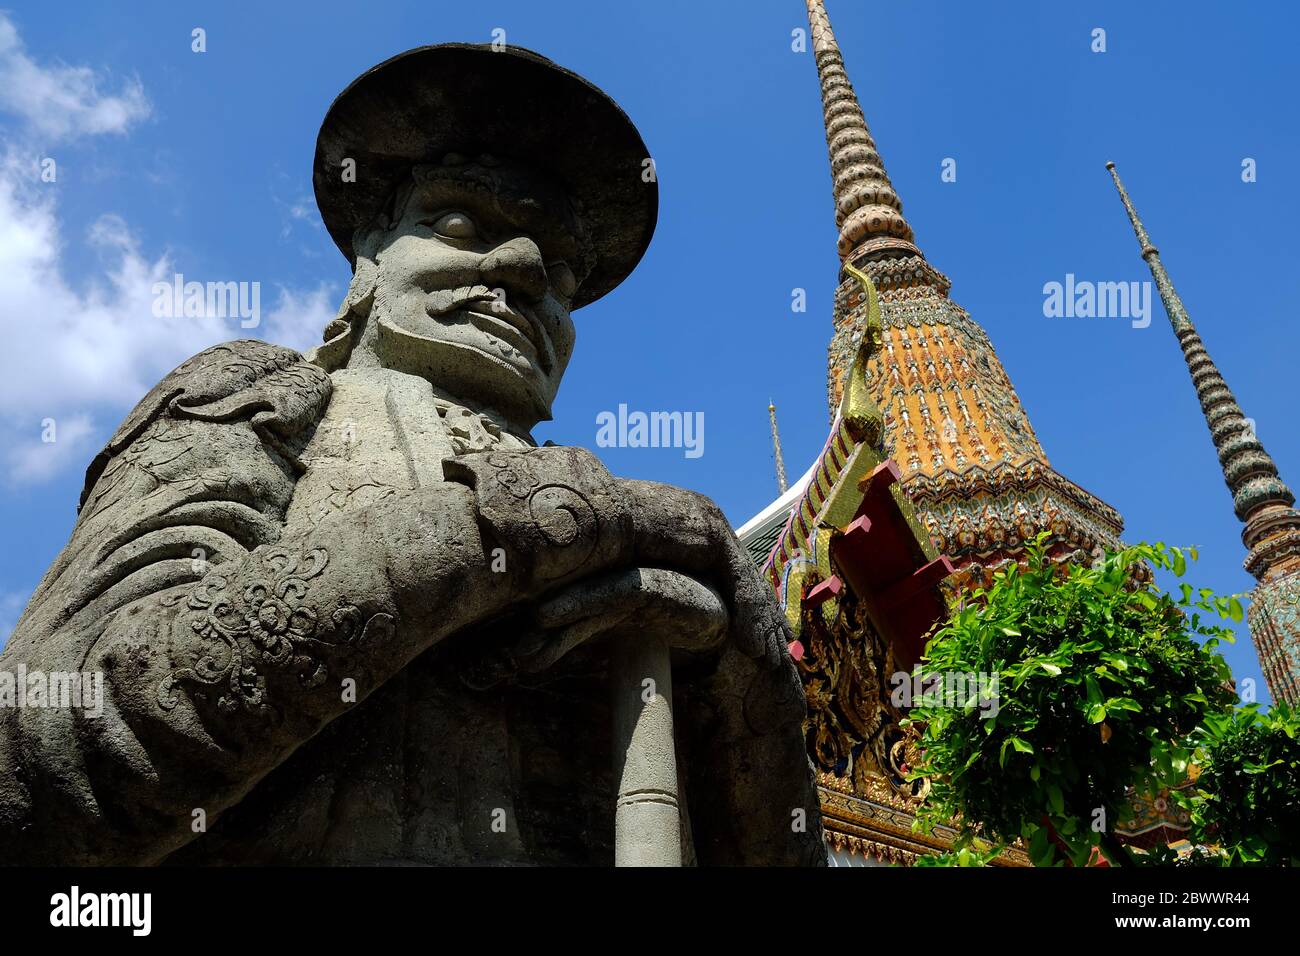 Close up Ancient Guardian Giants in Front of Wat Pho Temple Entrance, Bangkok Thailand. Stock Photo